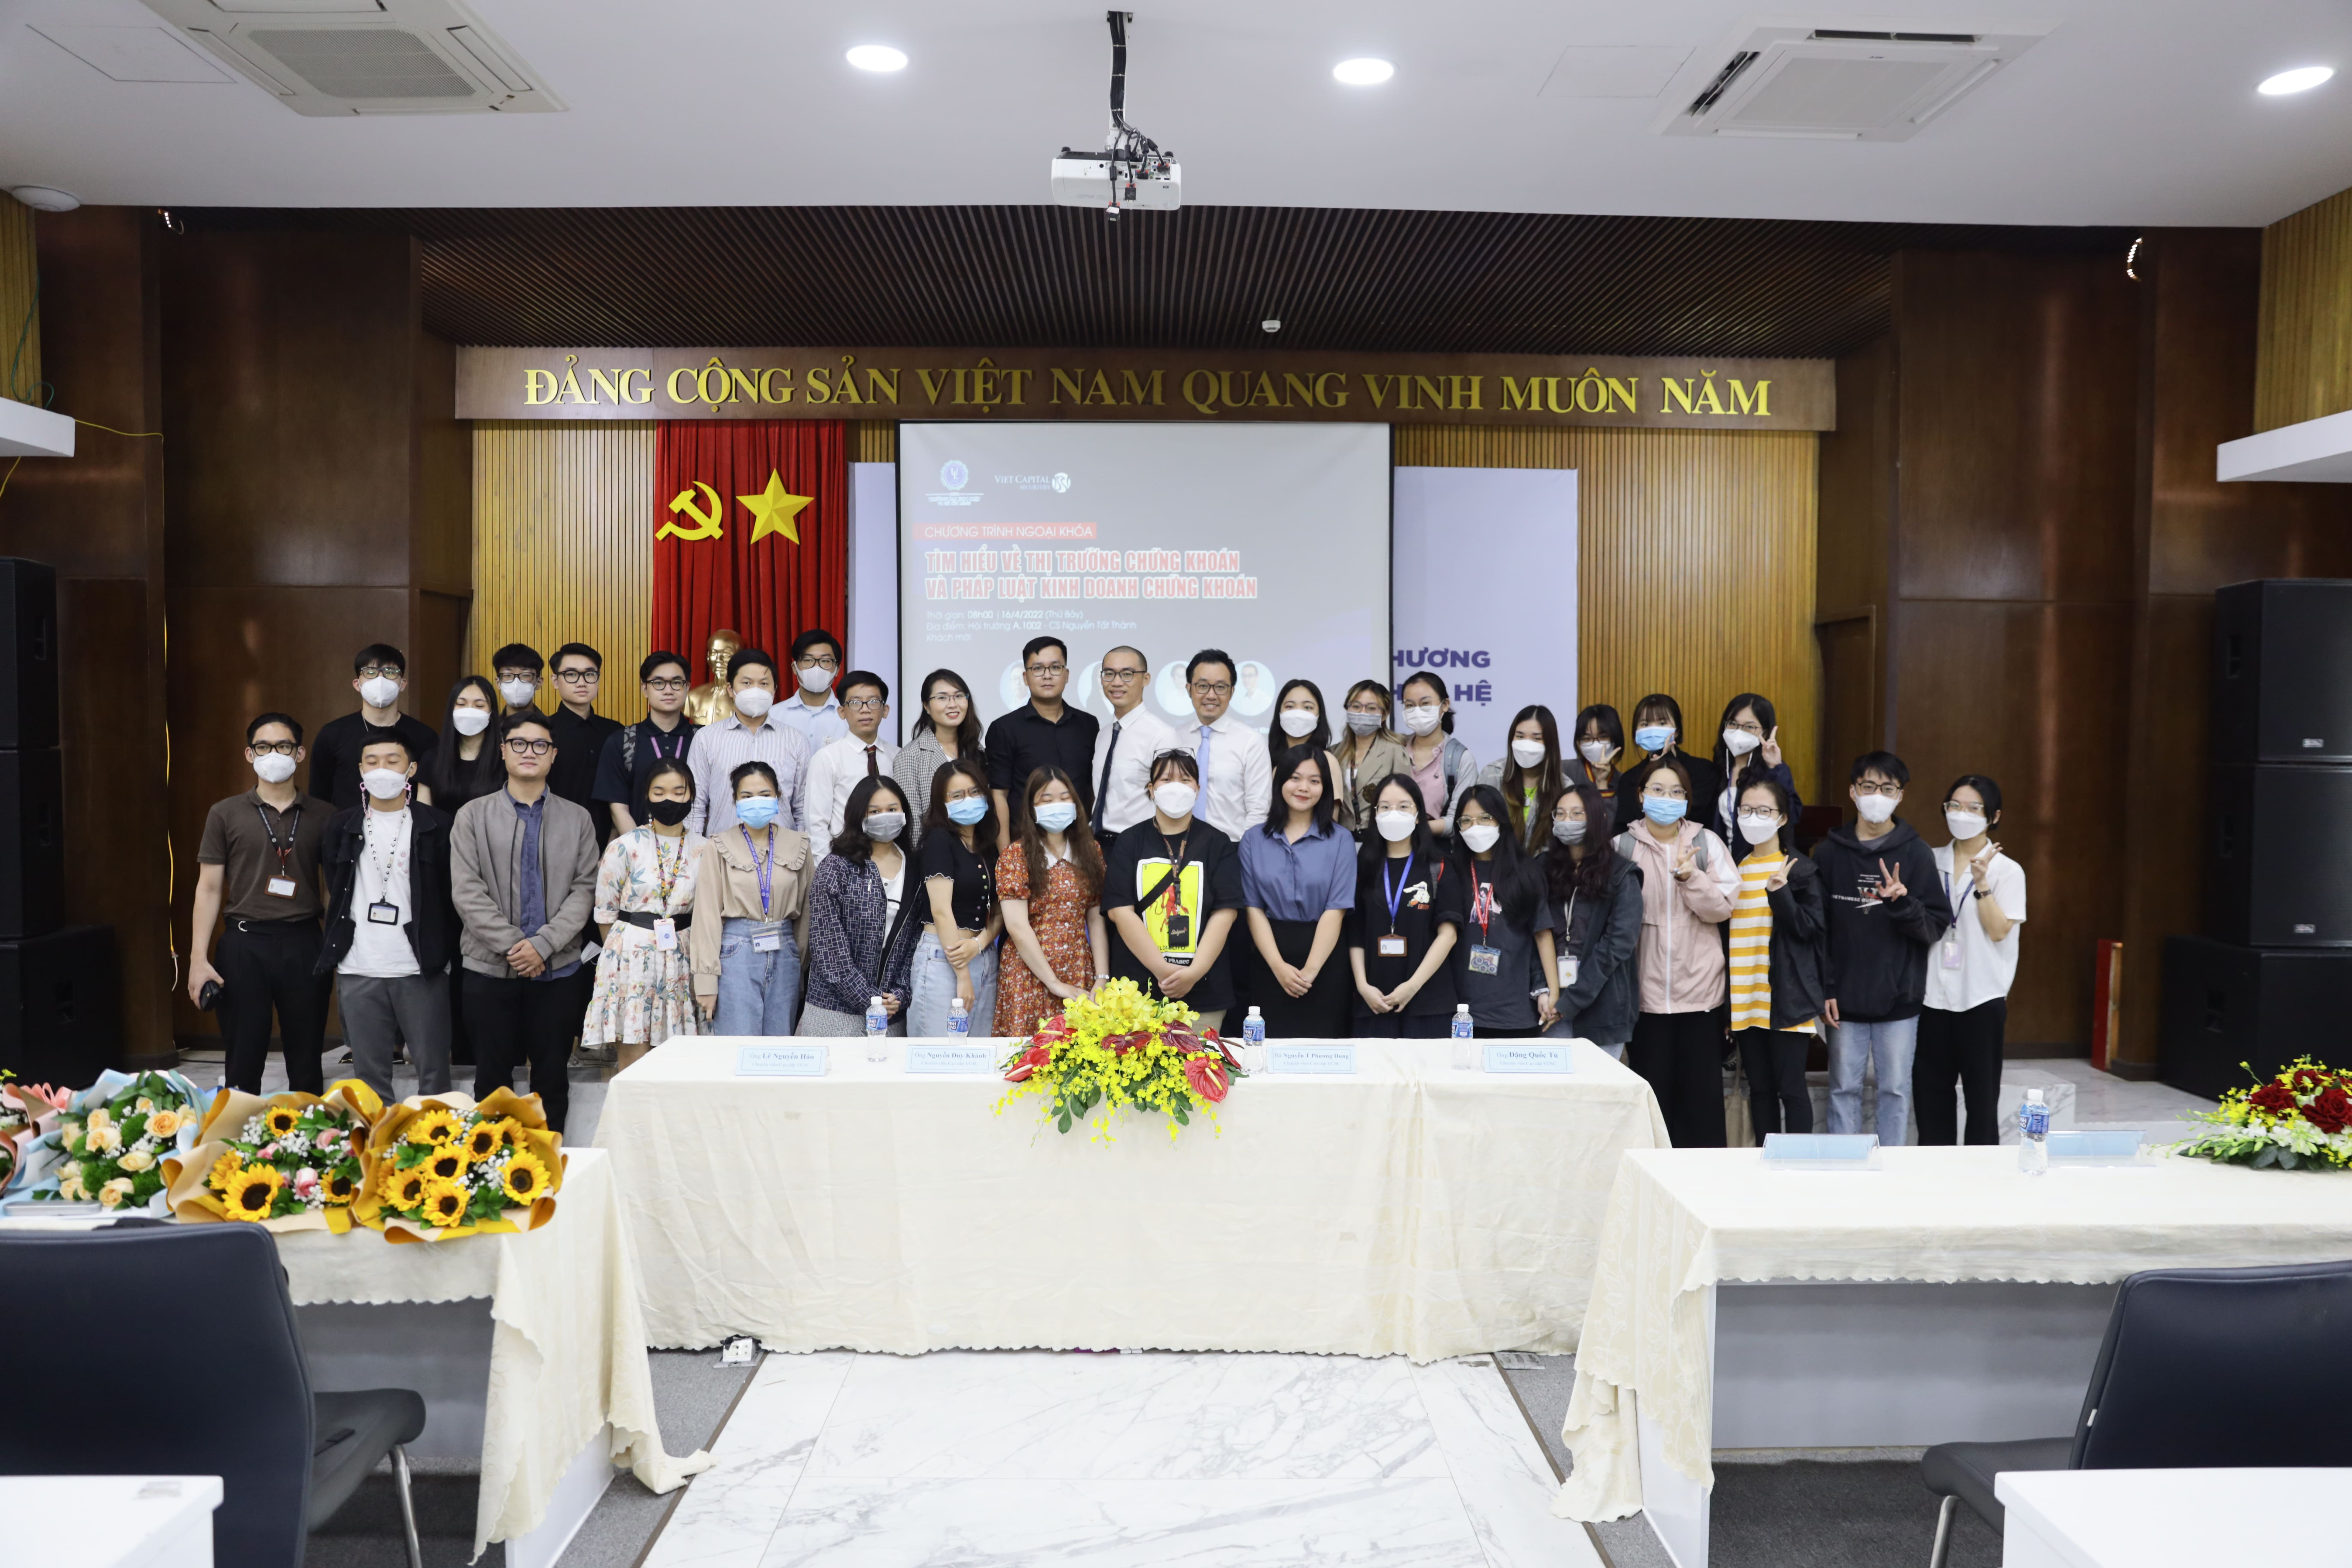 Vietcap conducts workshops at universities to educate students about the stock market.